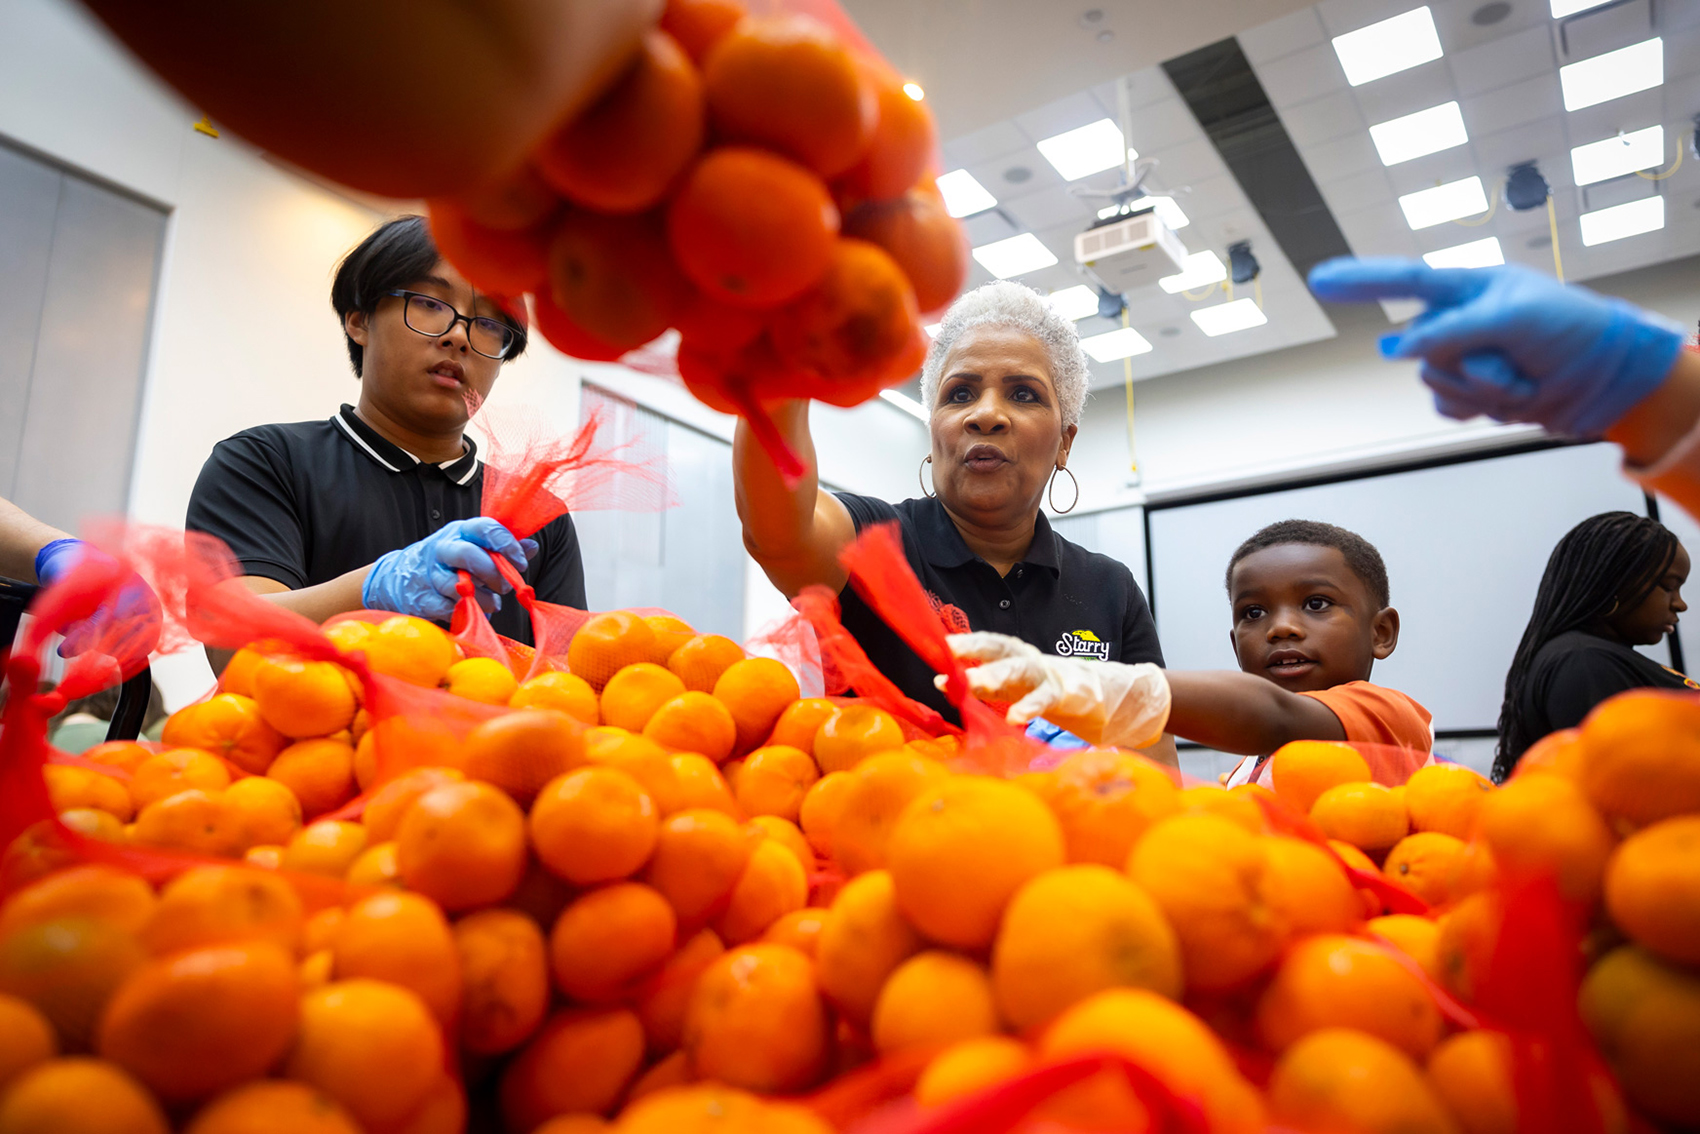 Diane McKinney counts bagged oranges at the Houston Food Bank